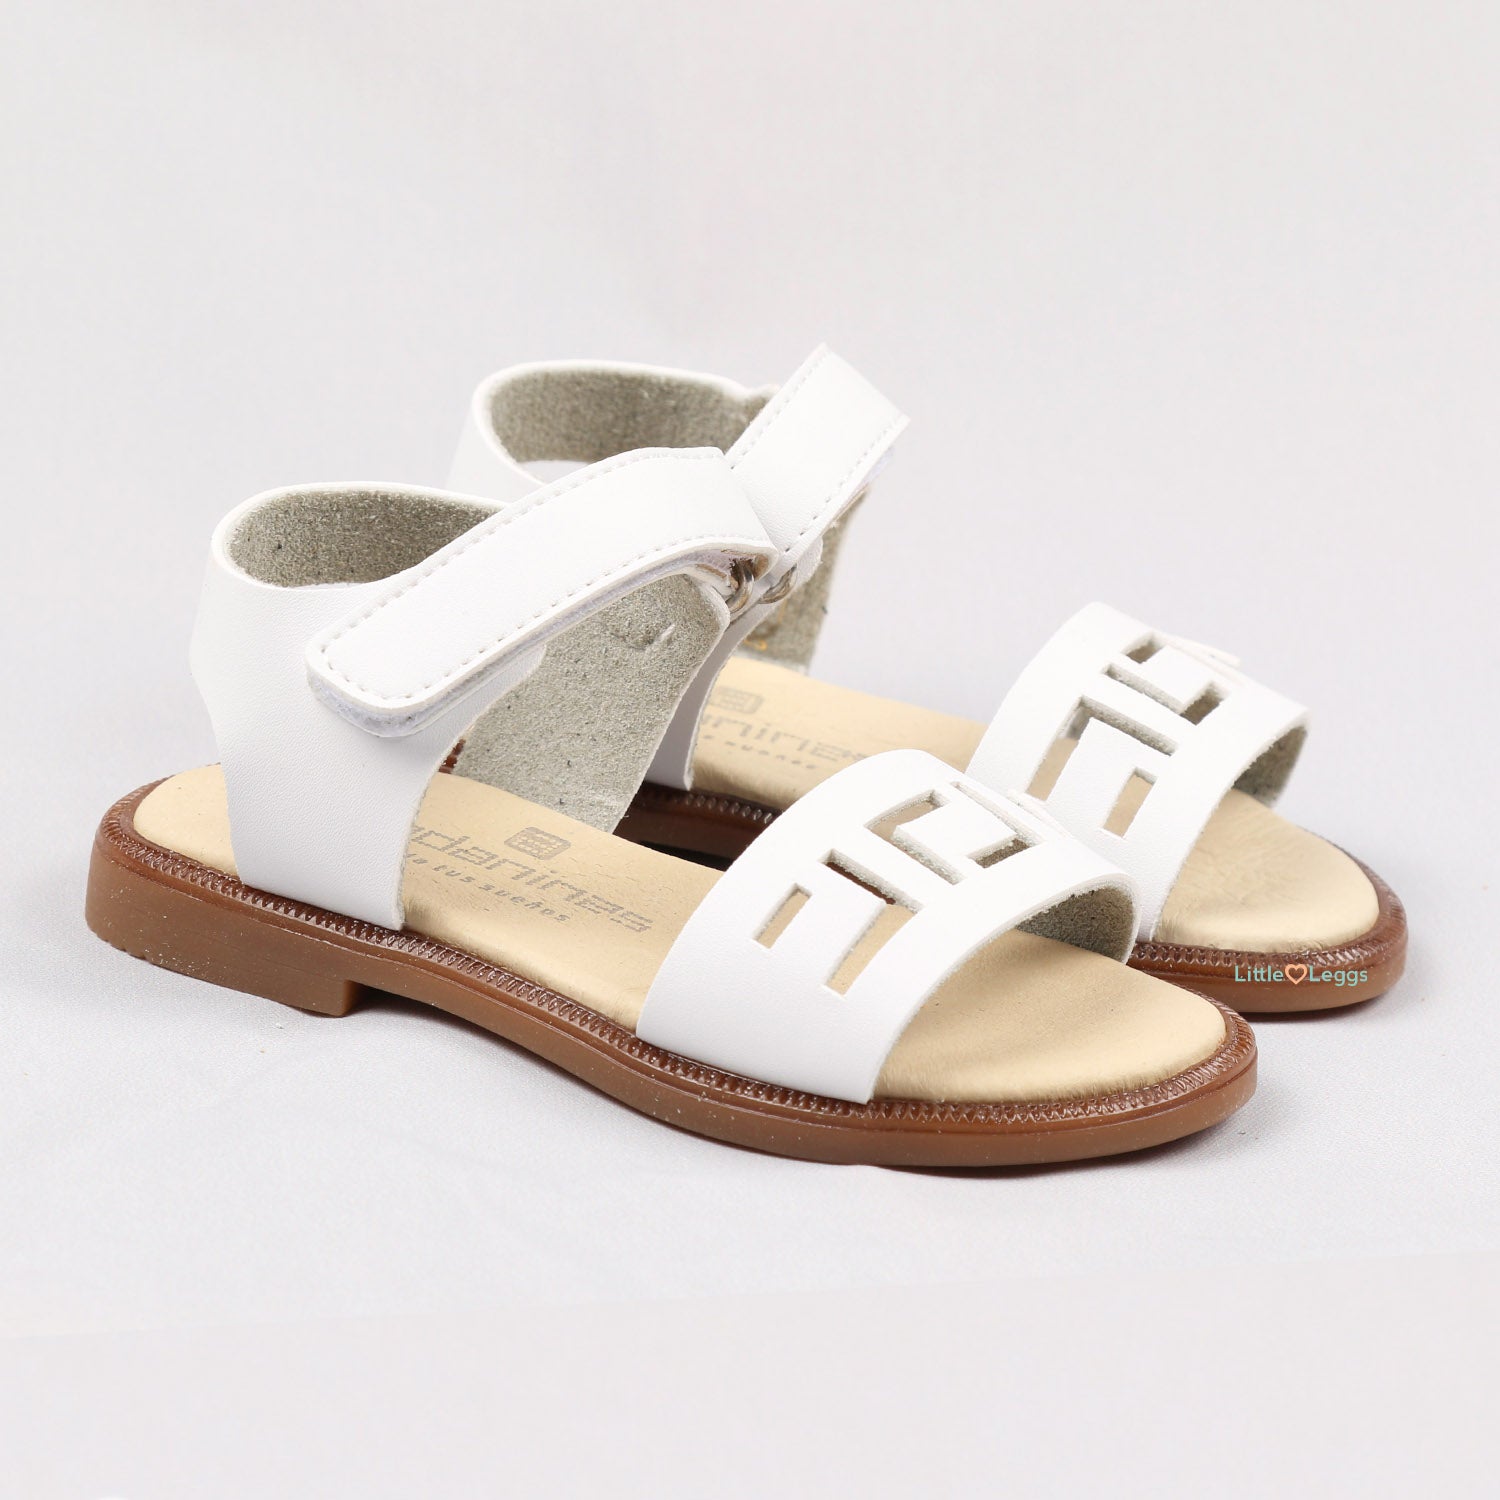 White Patterned Leather Sandals